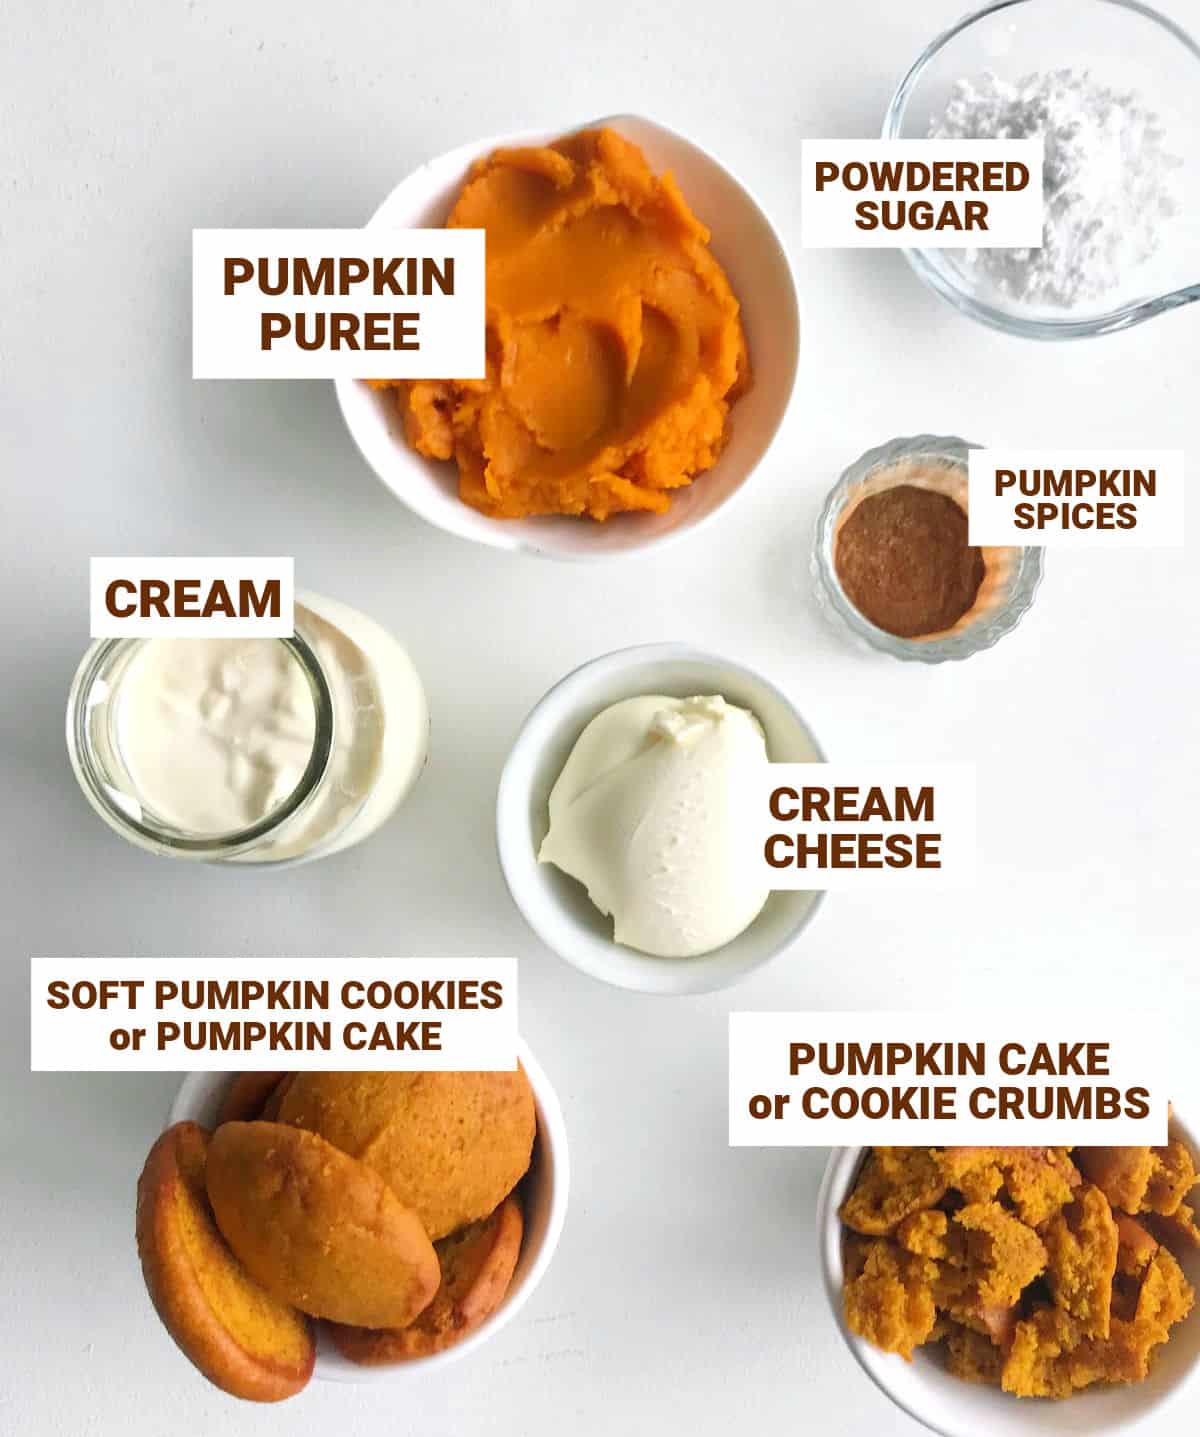 Bowls with ingredients for pumpkin trifle on a white surface including pumpkin cookies, cream, cream cheese, sugar, spices.